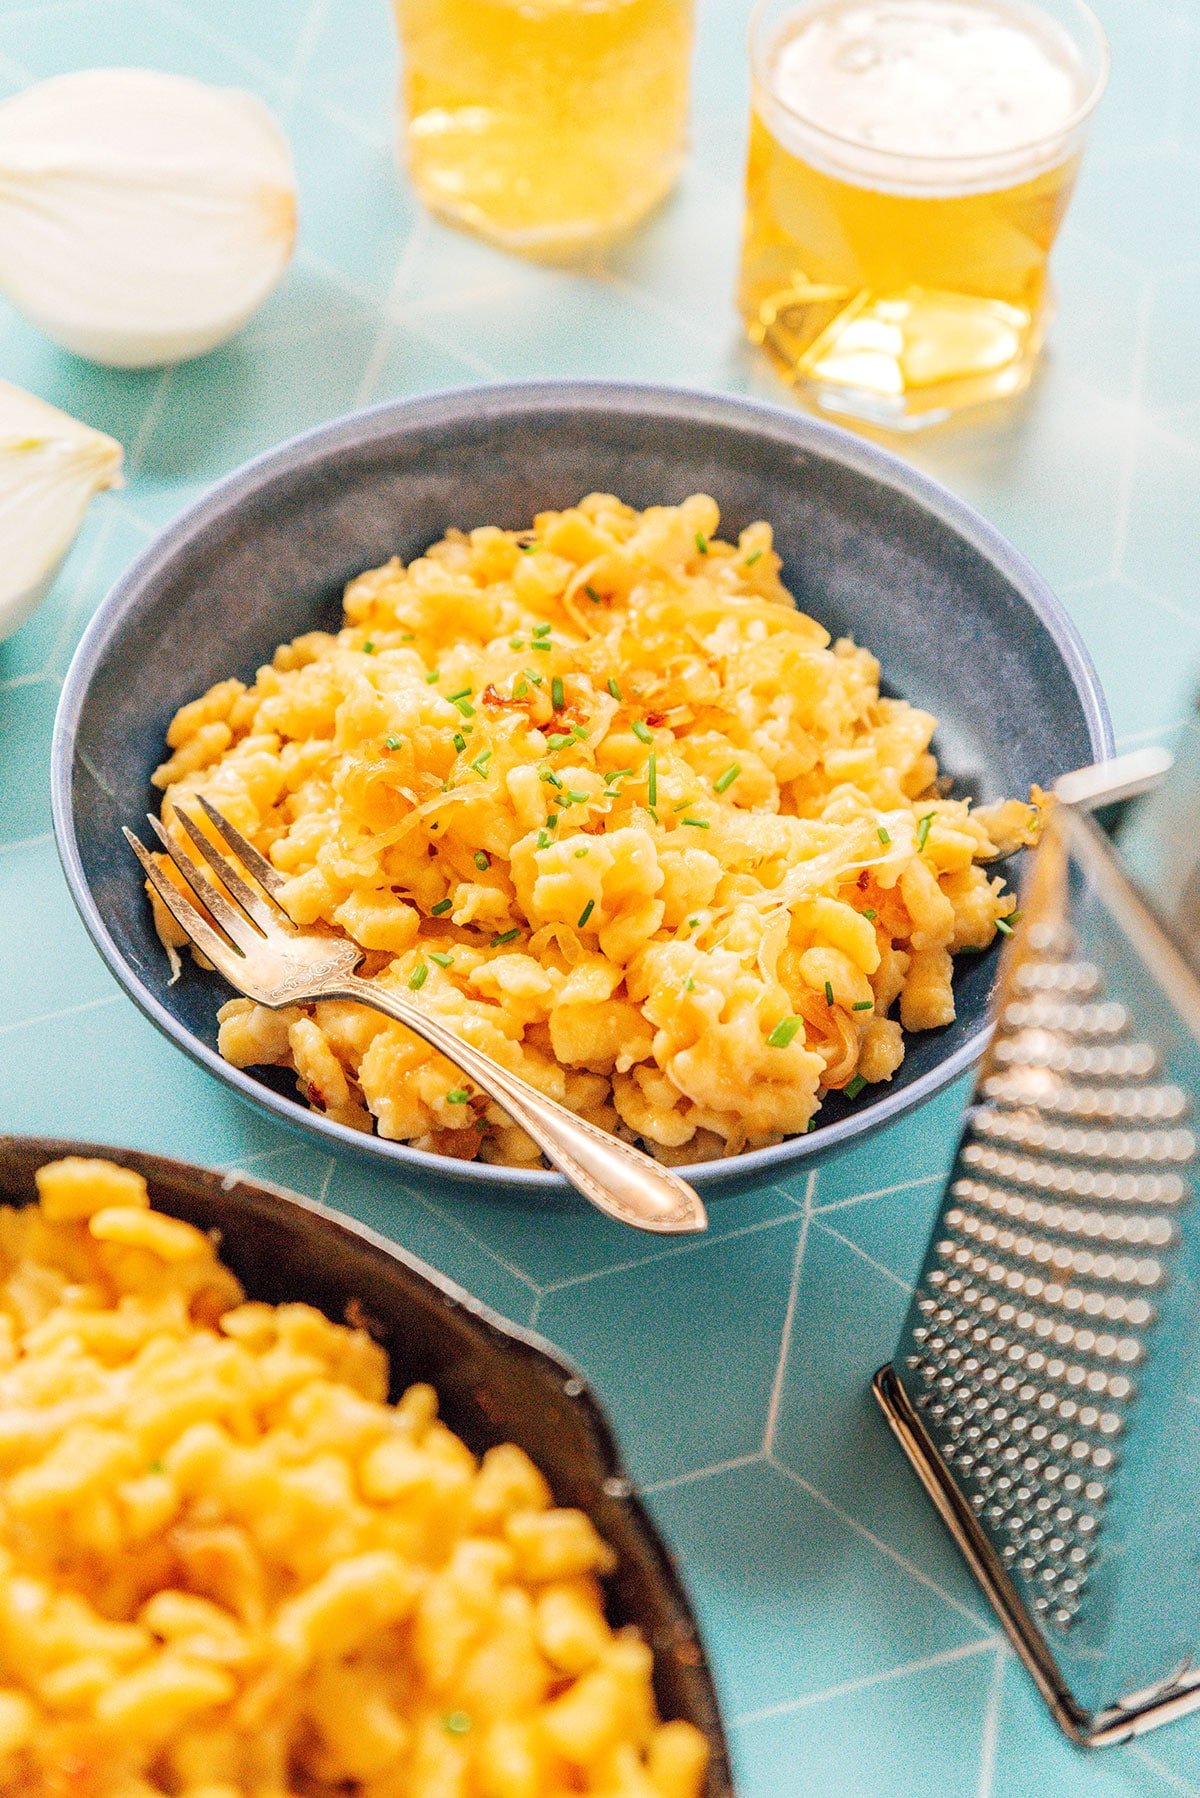 A gray bowl filled with a heaping serving of German Cheese Spaetzle garnished with chives